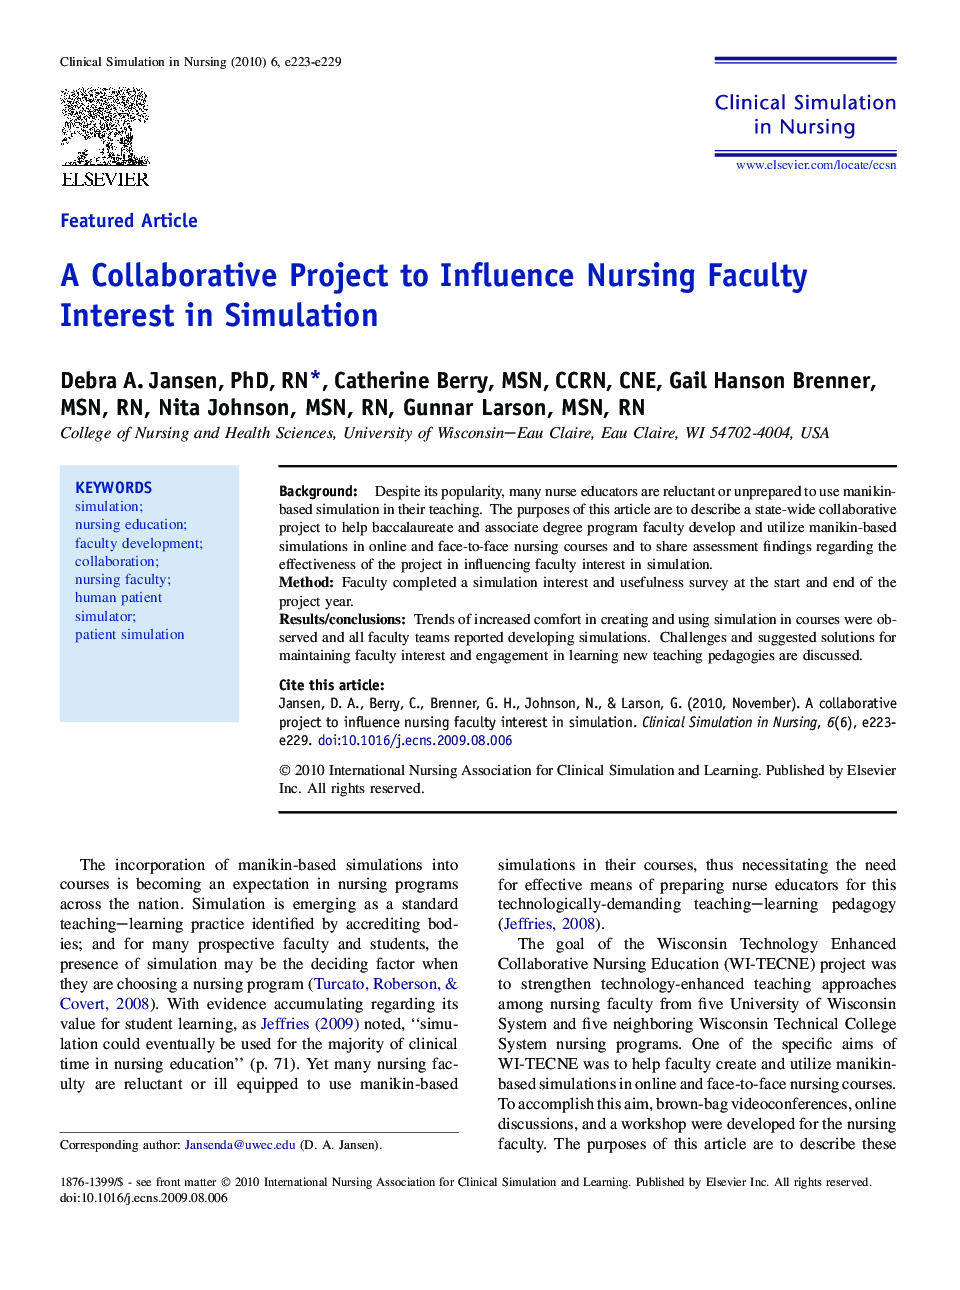 A Collaborative Project to Influence Nursing Faculty Interest in Simulation 